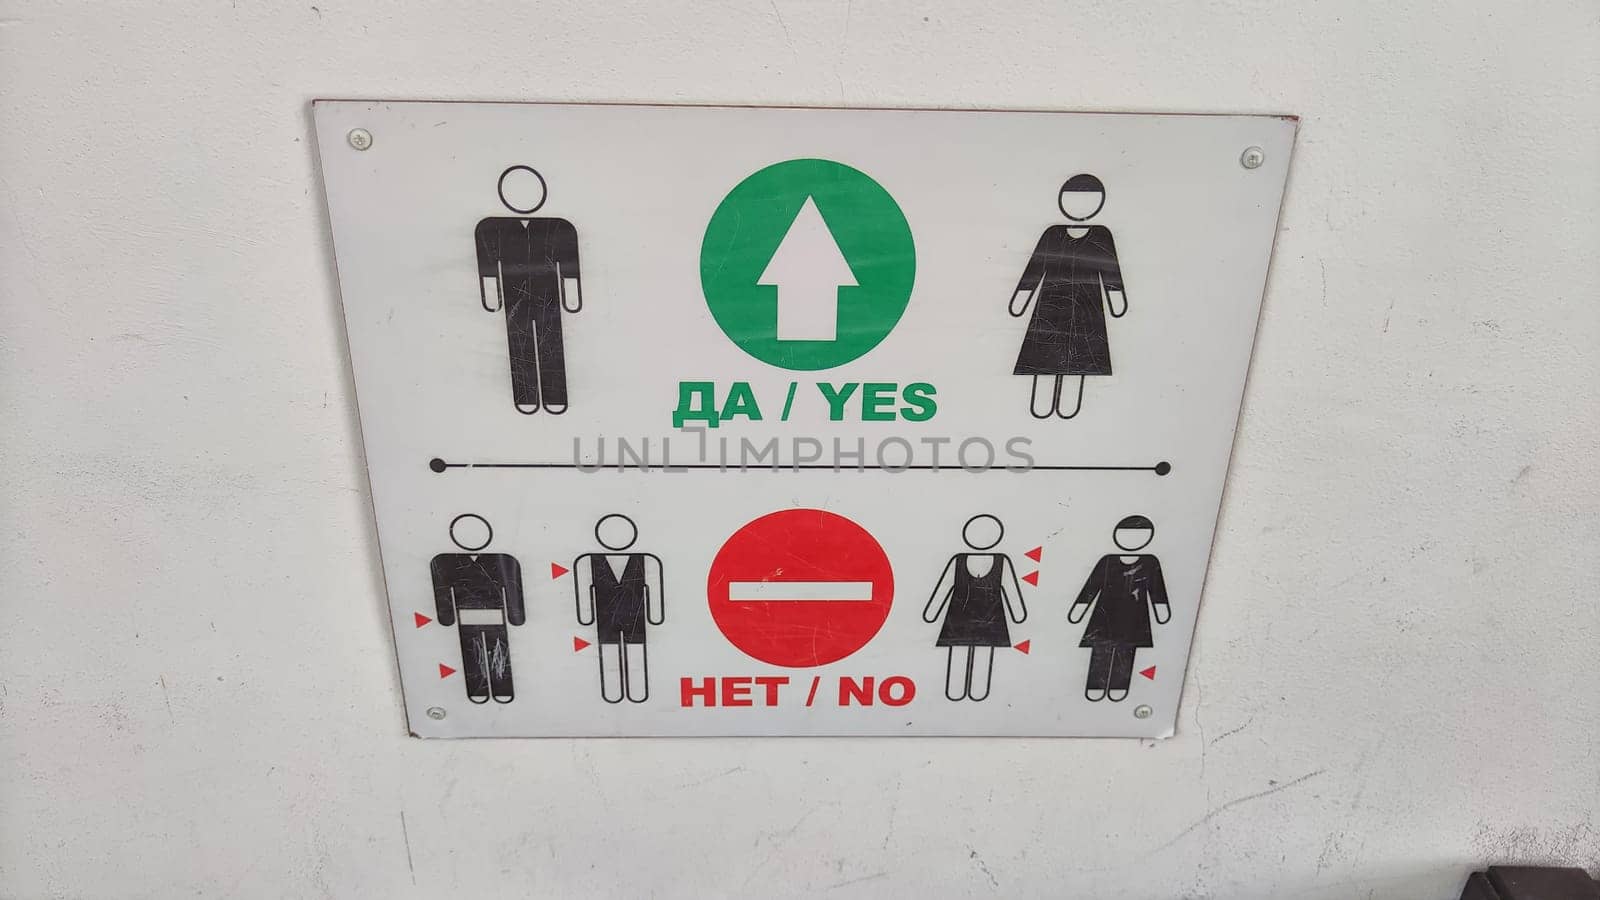 Bilingual Directions for Restroom Access Displayed on Sign. Sign indicating separate bathroom access with bilingual Yes and No directions by keleny